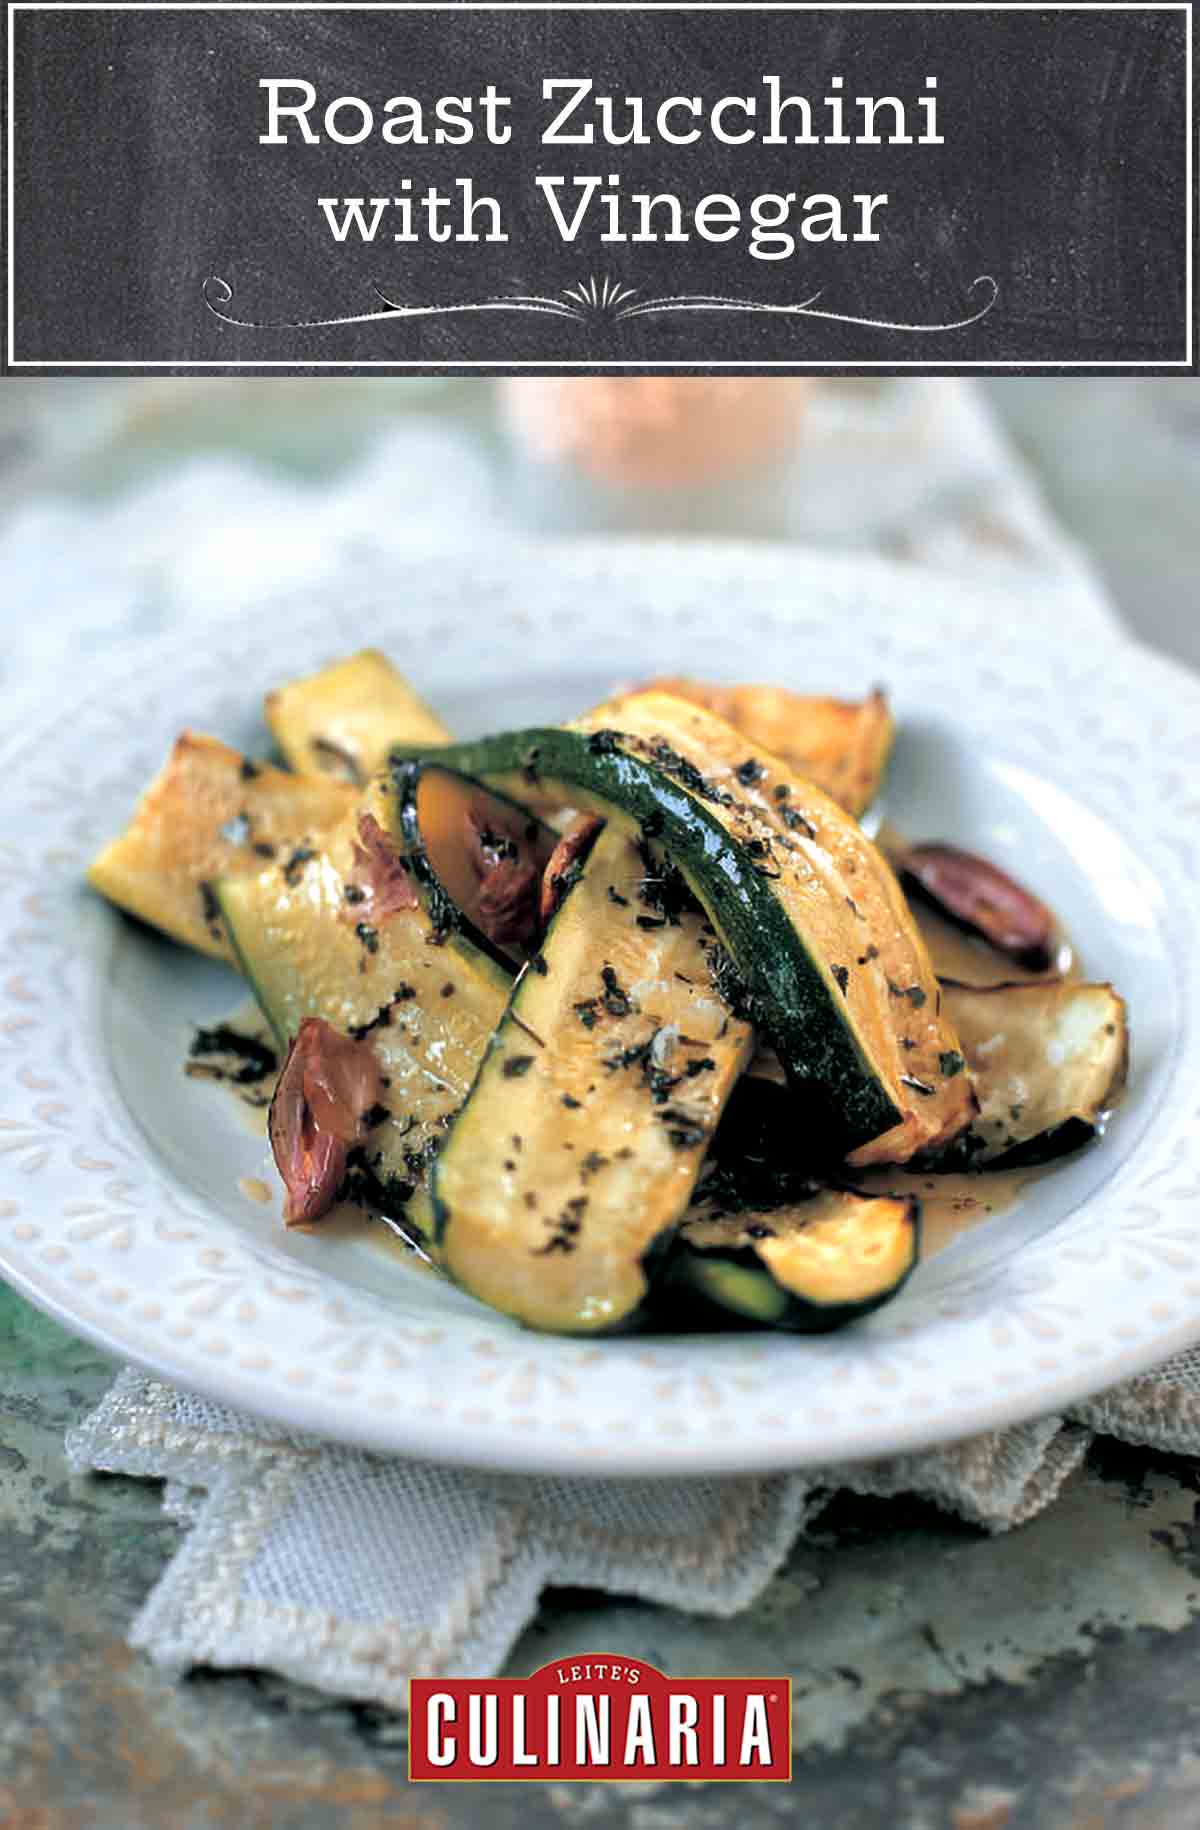 A white plate filled with slices of roasted zucchini, olive oil, dark roasted cloves of garlic, and mint.